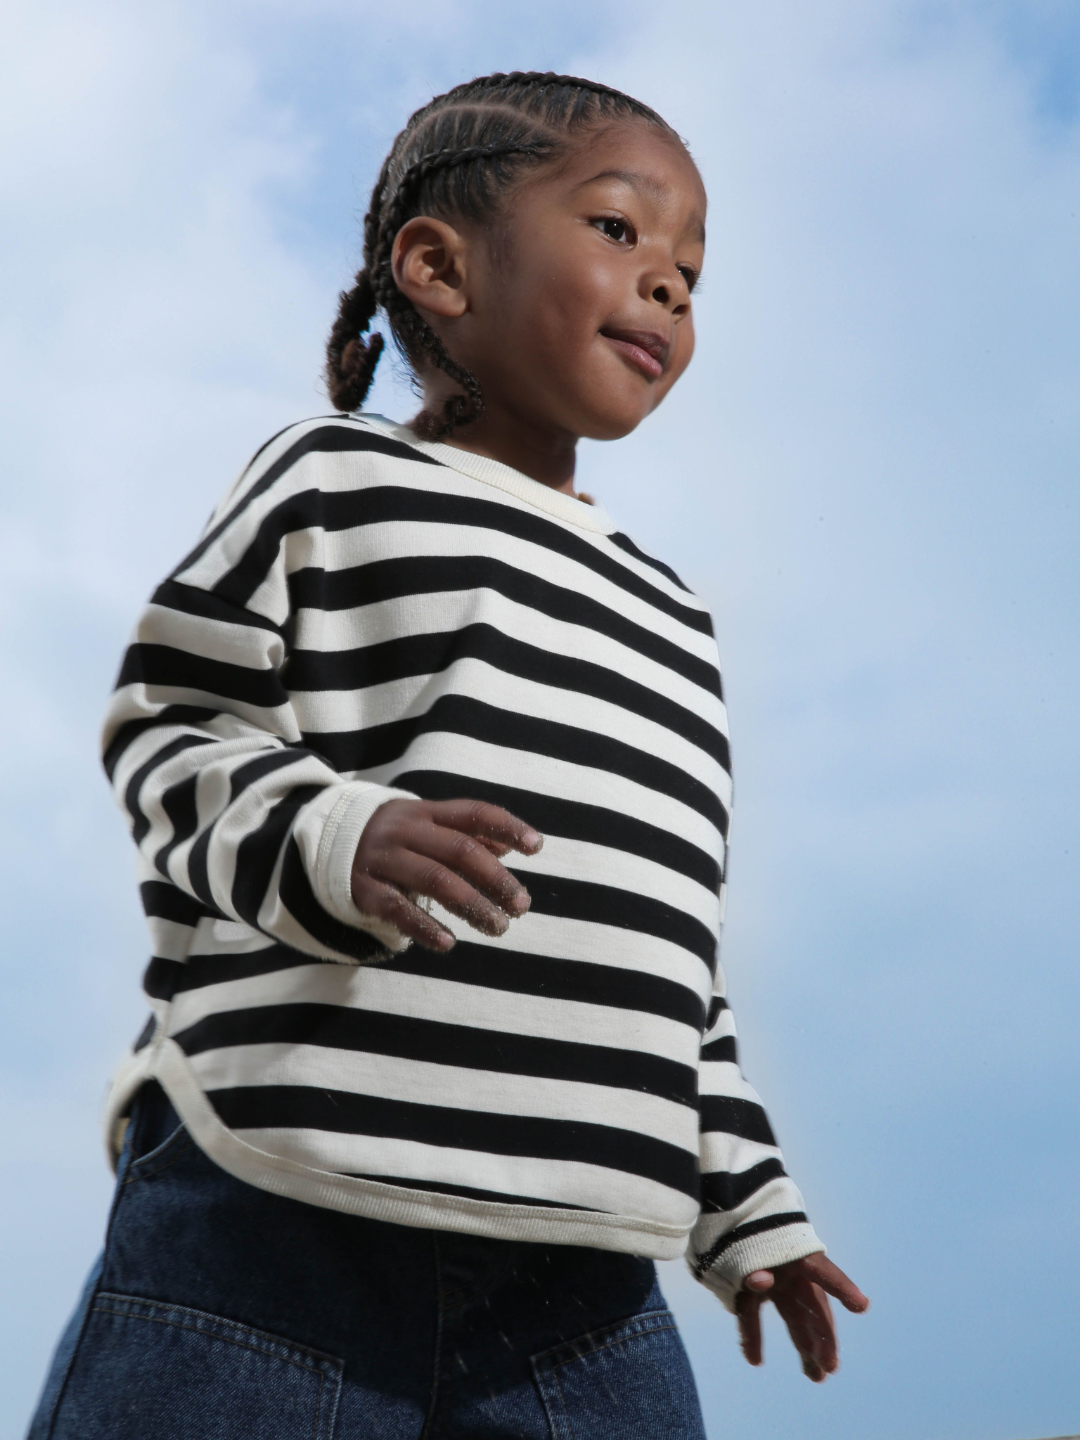 Black | Child wearing the perfect stripey longsleeve tee with black and cream horizontal stripes. He wears blue jeans and his hair in braids, and is standing against blue sky.